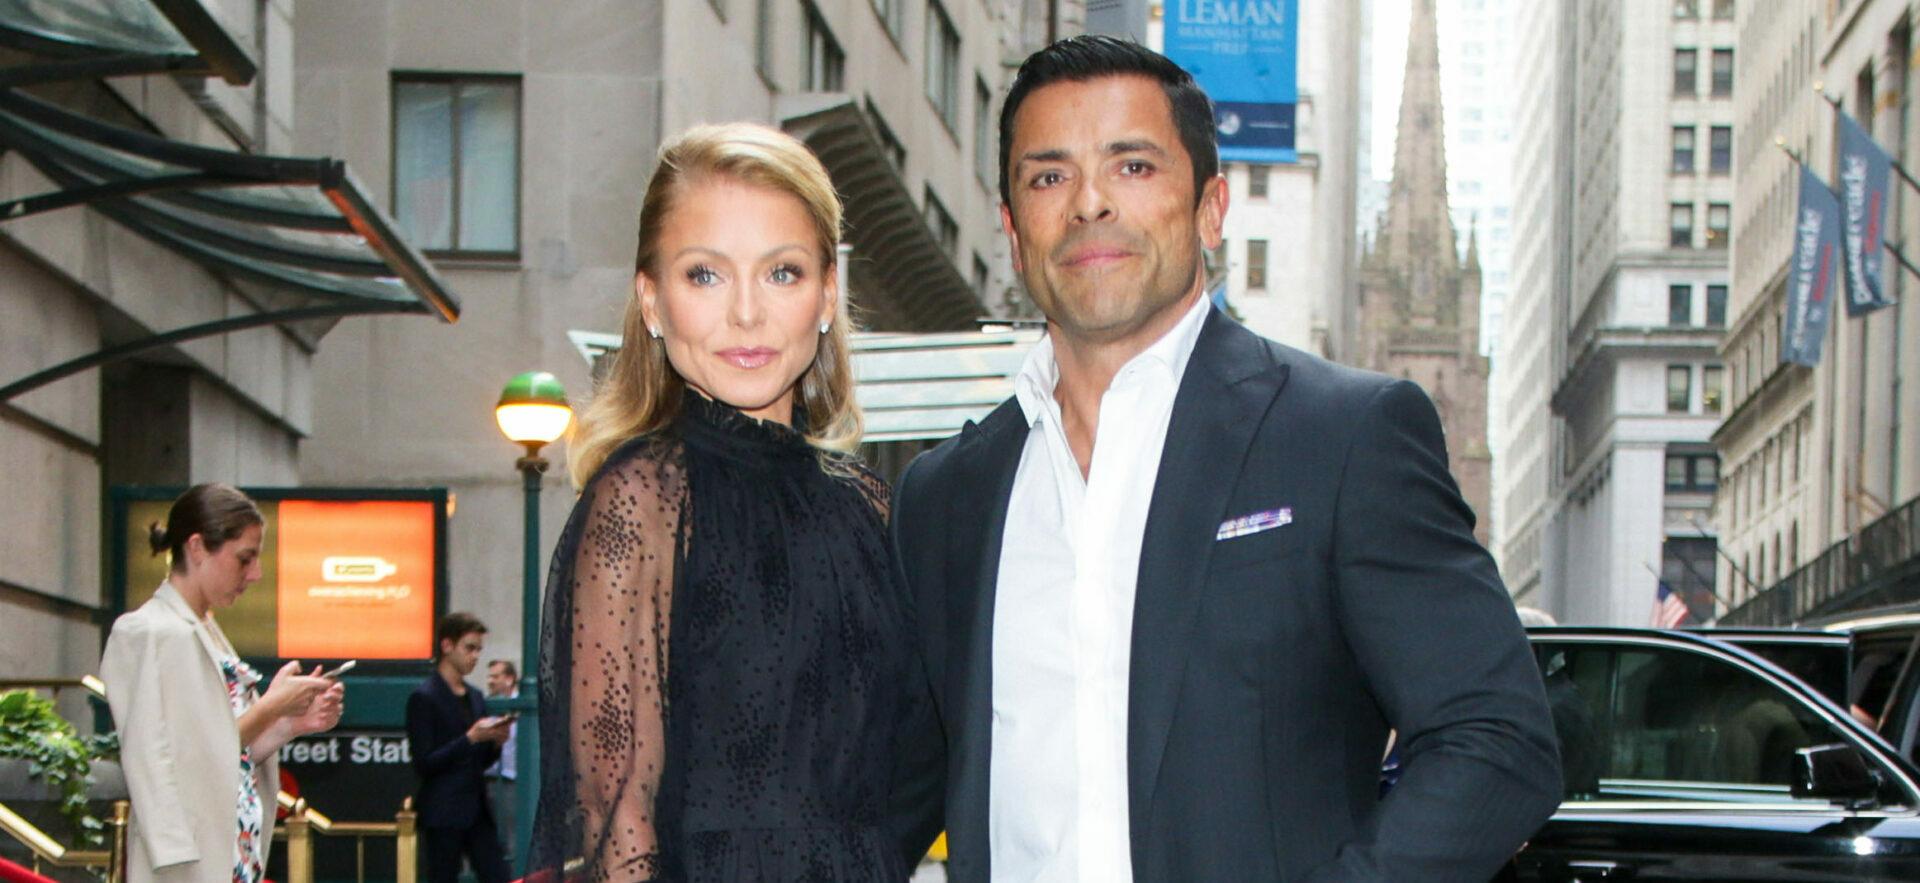 Kelly Ripa and Mark Consuelos Show Off Their ‘Empty Nest’ After Sending Son Joaquin to College